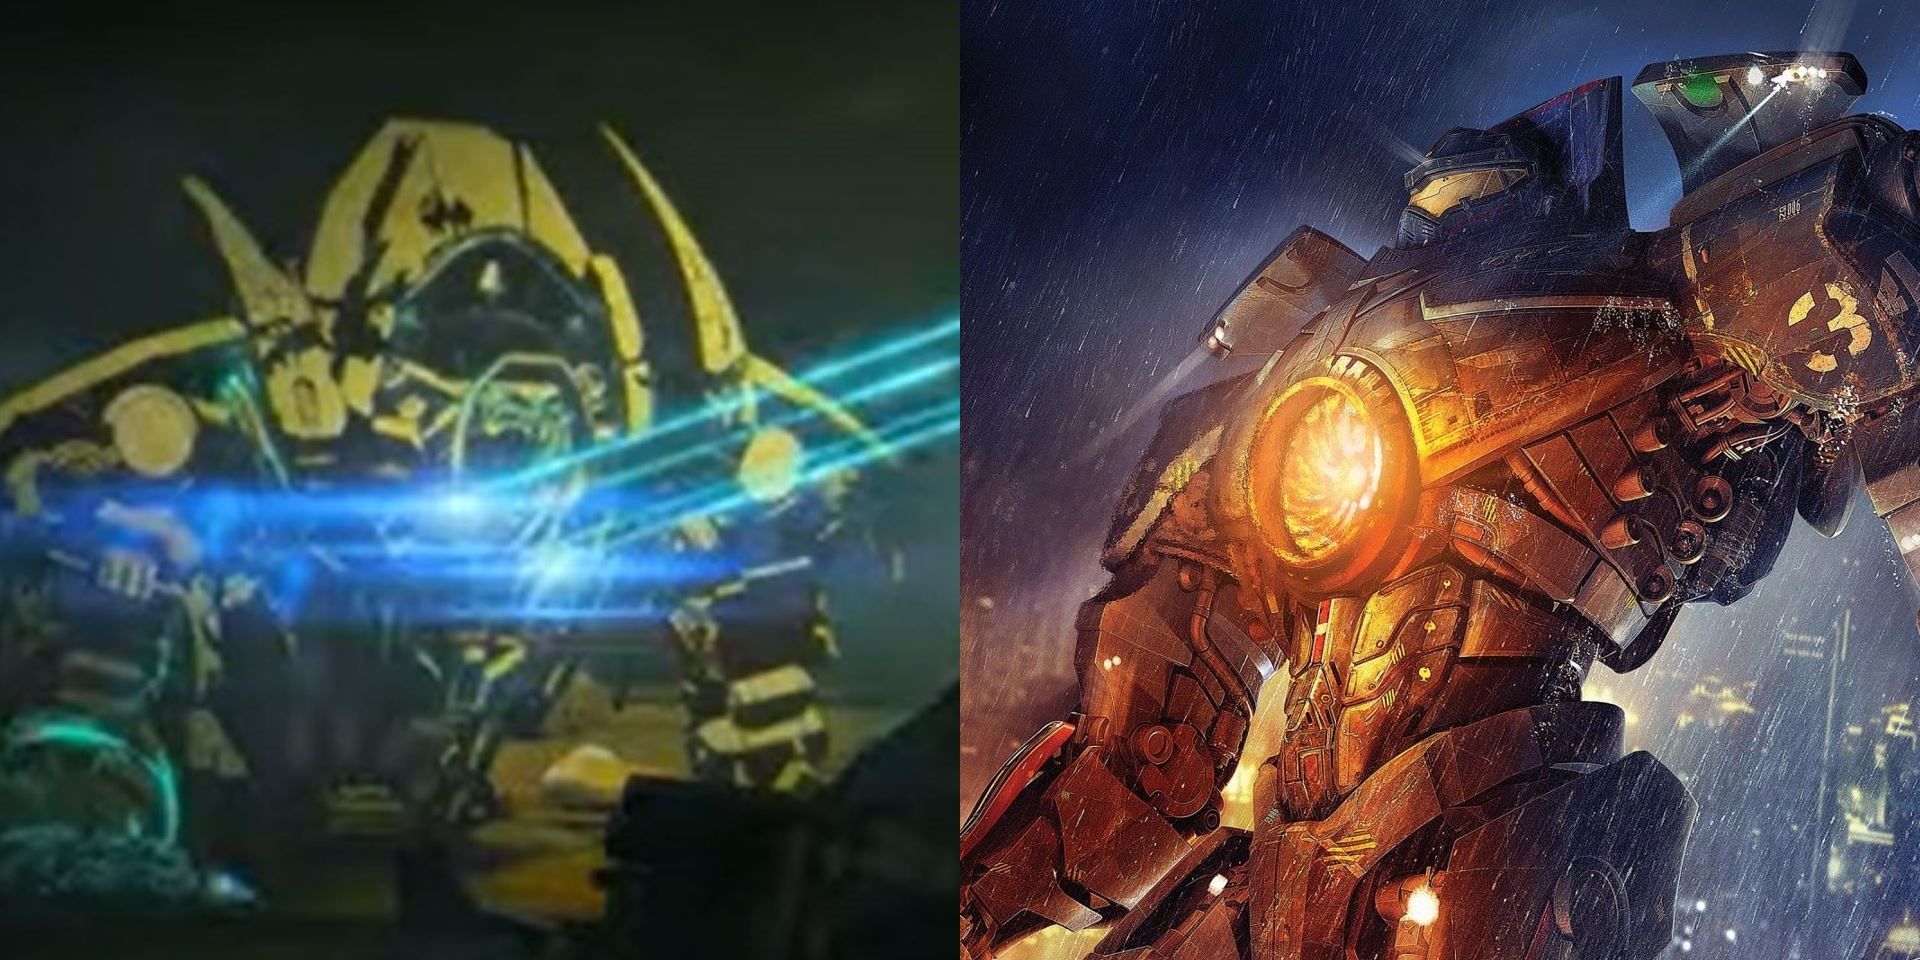 Jaegers in both Pacific Rim the movie and Pacific Rim: The Black